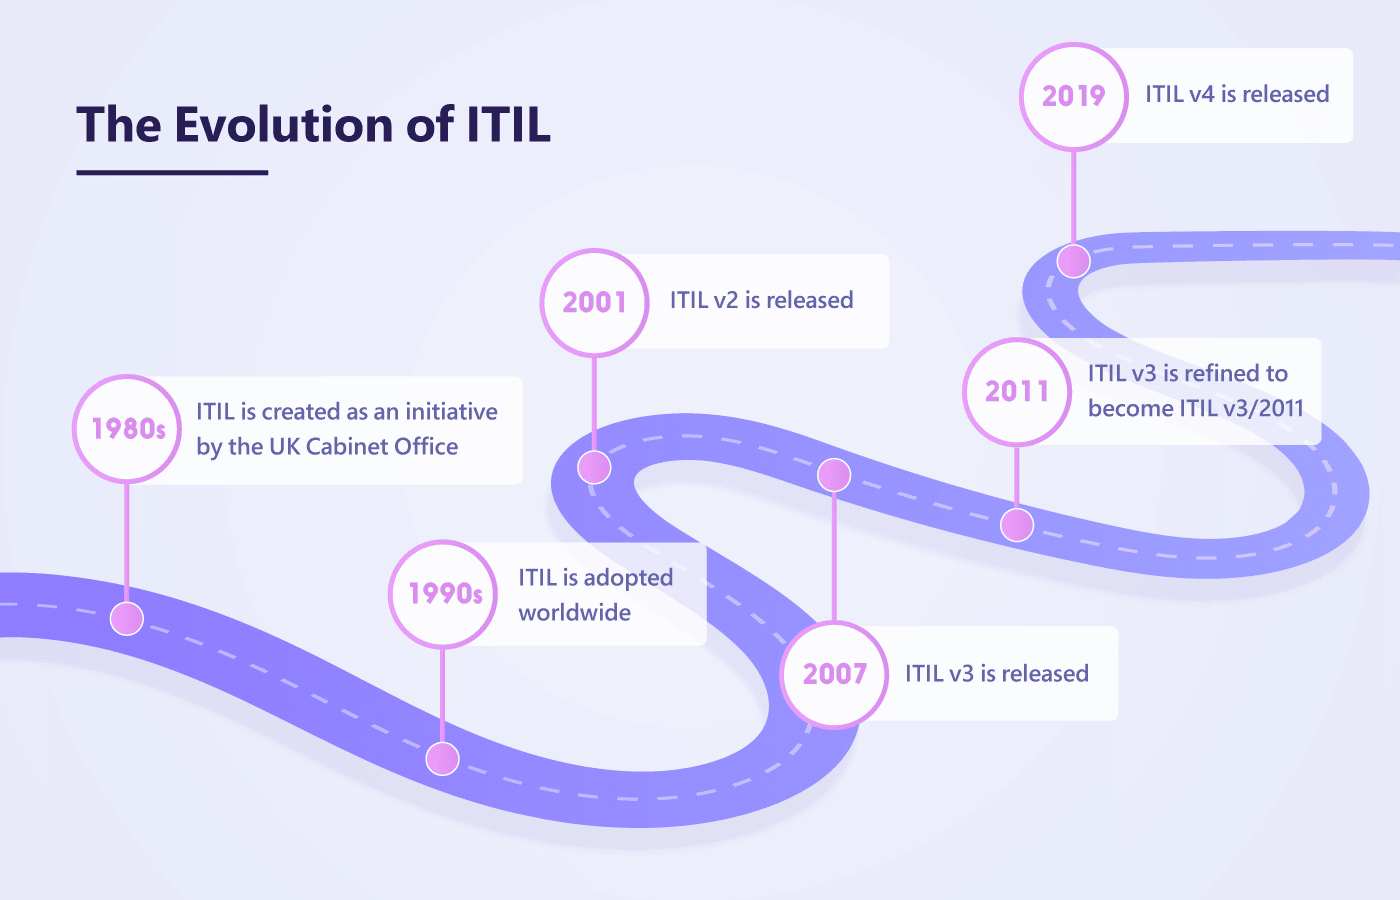 The evolution of ITIL